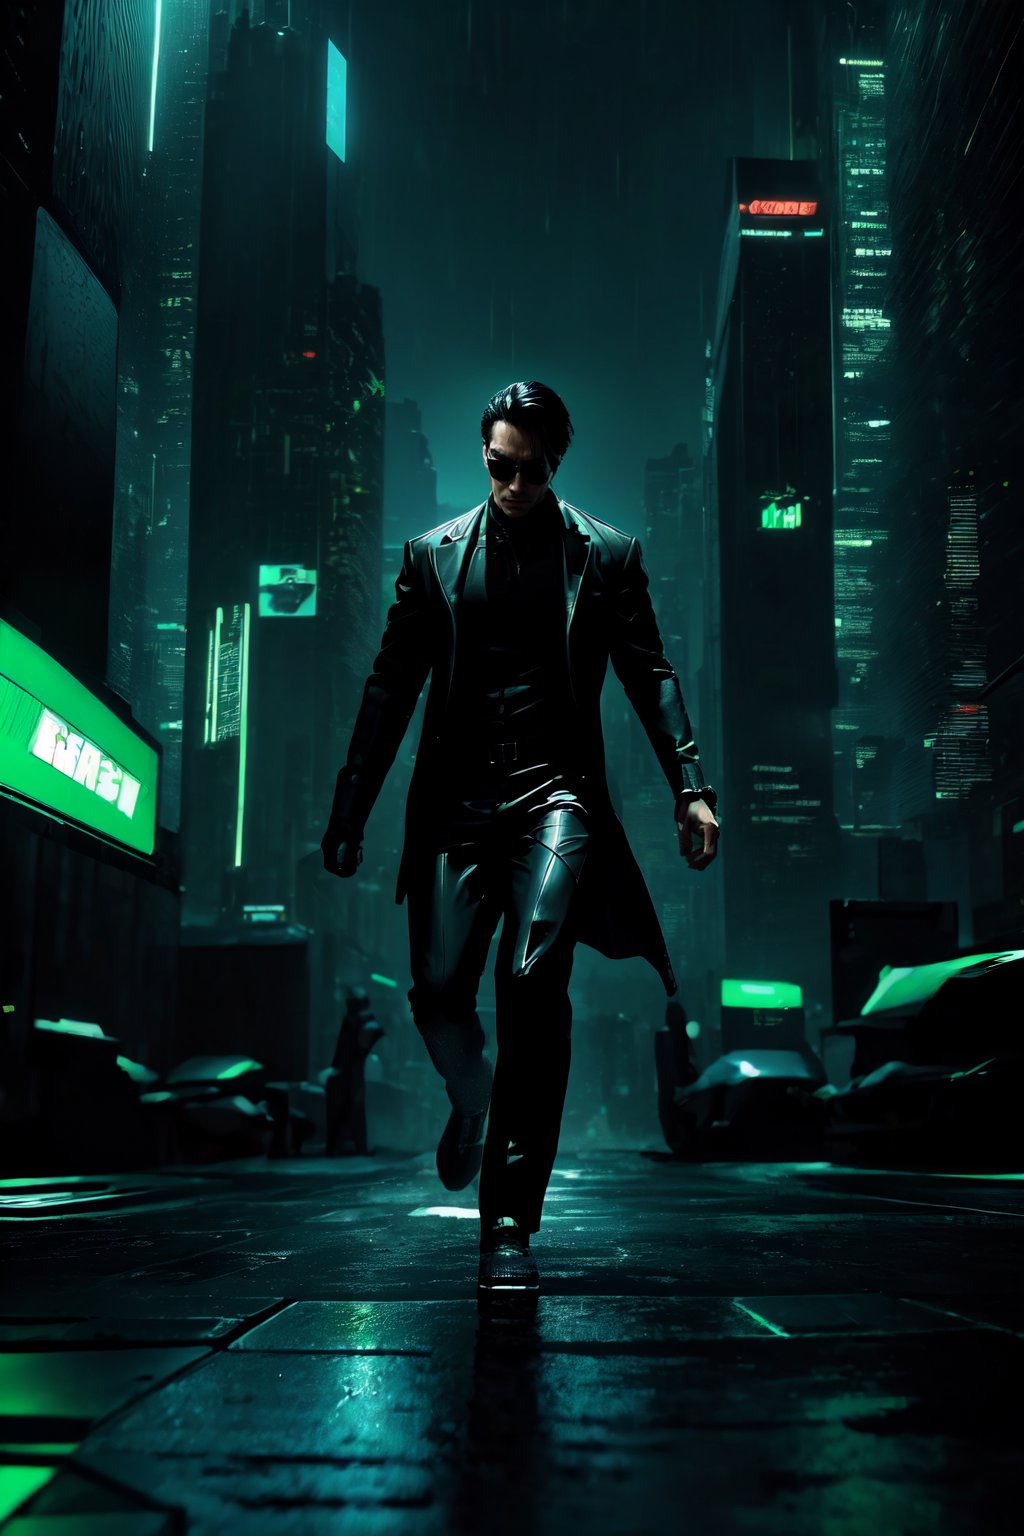 high-definition, dynamic, action-packed, 
1man, Matrix style, leaping, mid-air, all-black suit, black glasses, athletic build, intense expression, 
((depth of field)), urban skyline, futuristic cityscape, dark ambiance, digital code rain, neon lights, gorgeous movements, Code matrix cascading from top to bottom, by FuturEvoLab, 
gravity-defying, cyberpunk atmosphere, surreal, digital world, ,Edge feathering and holy light,Cyberpunk